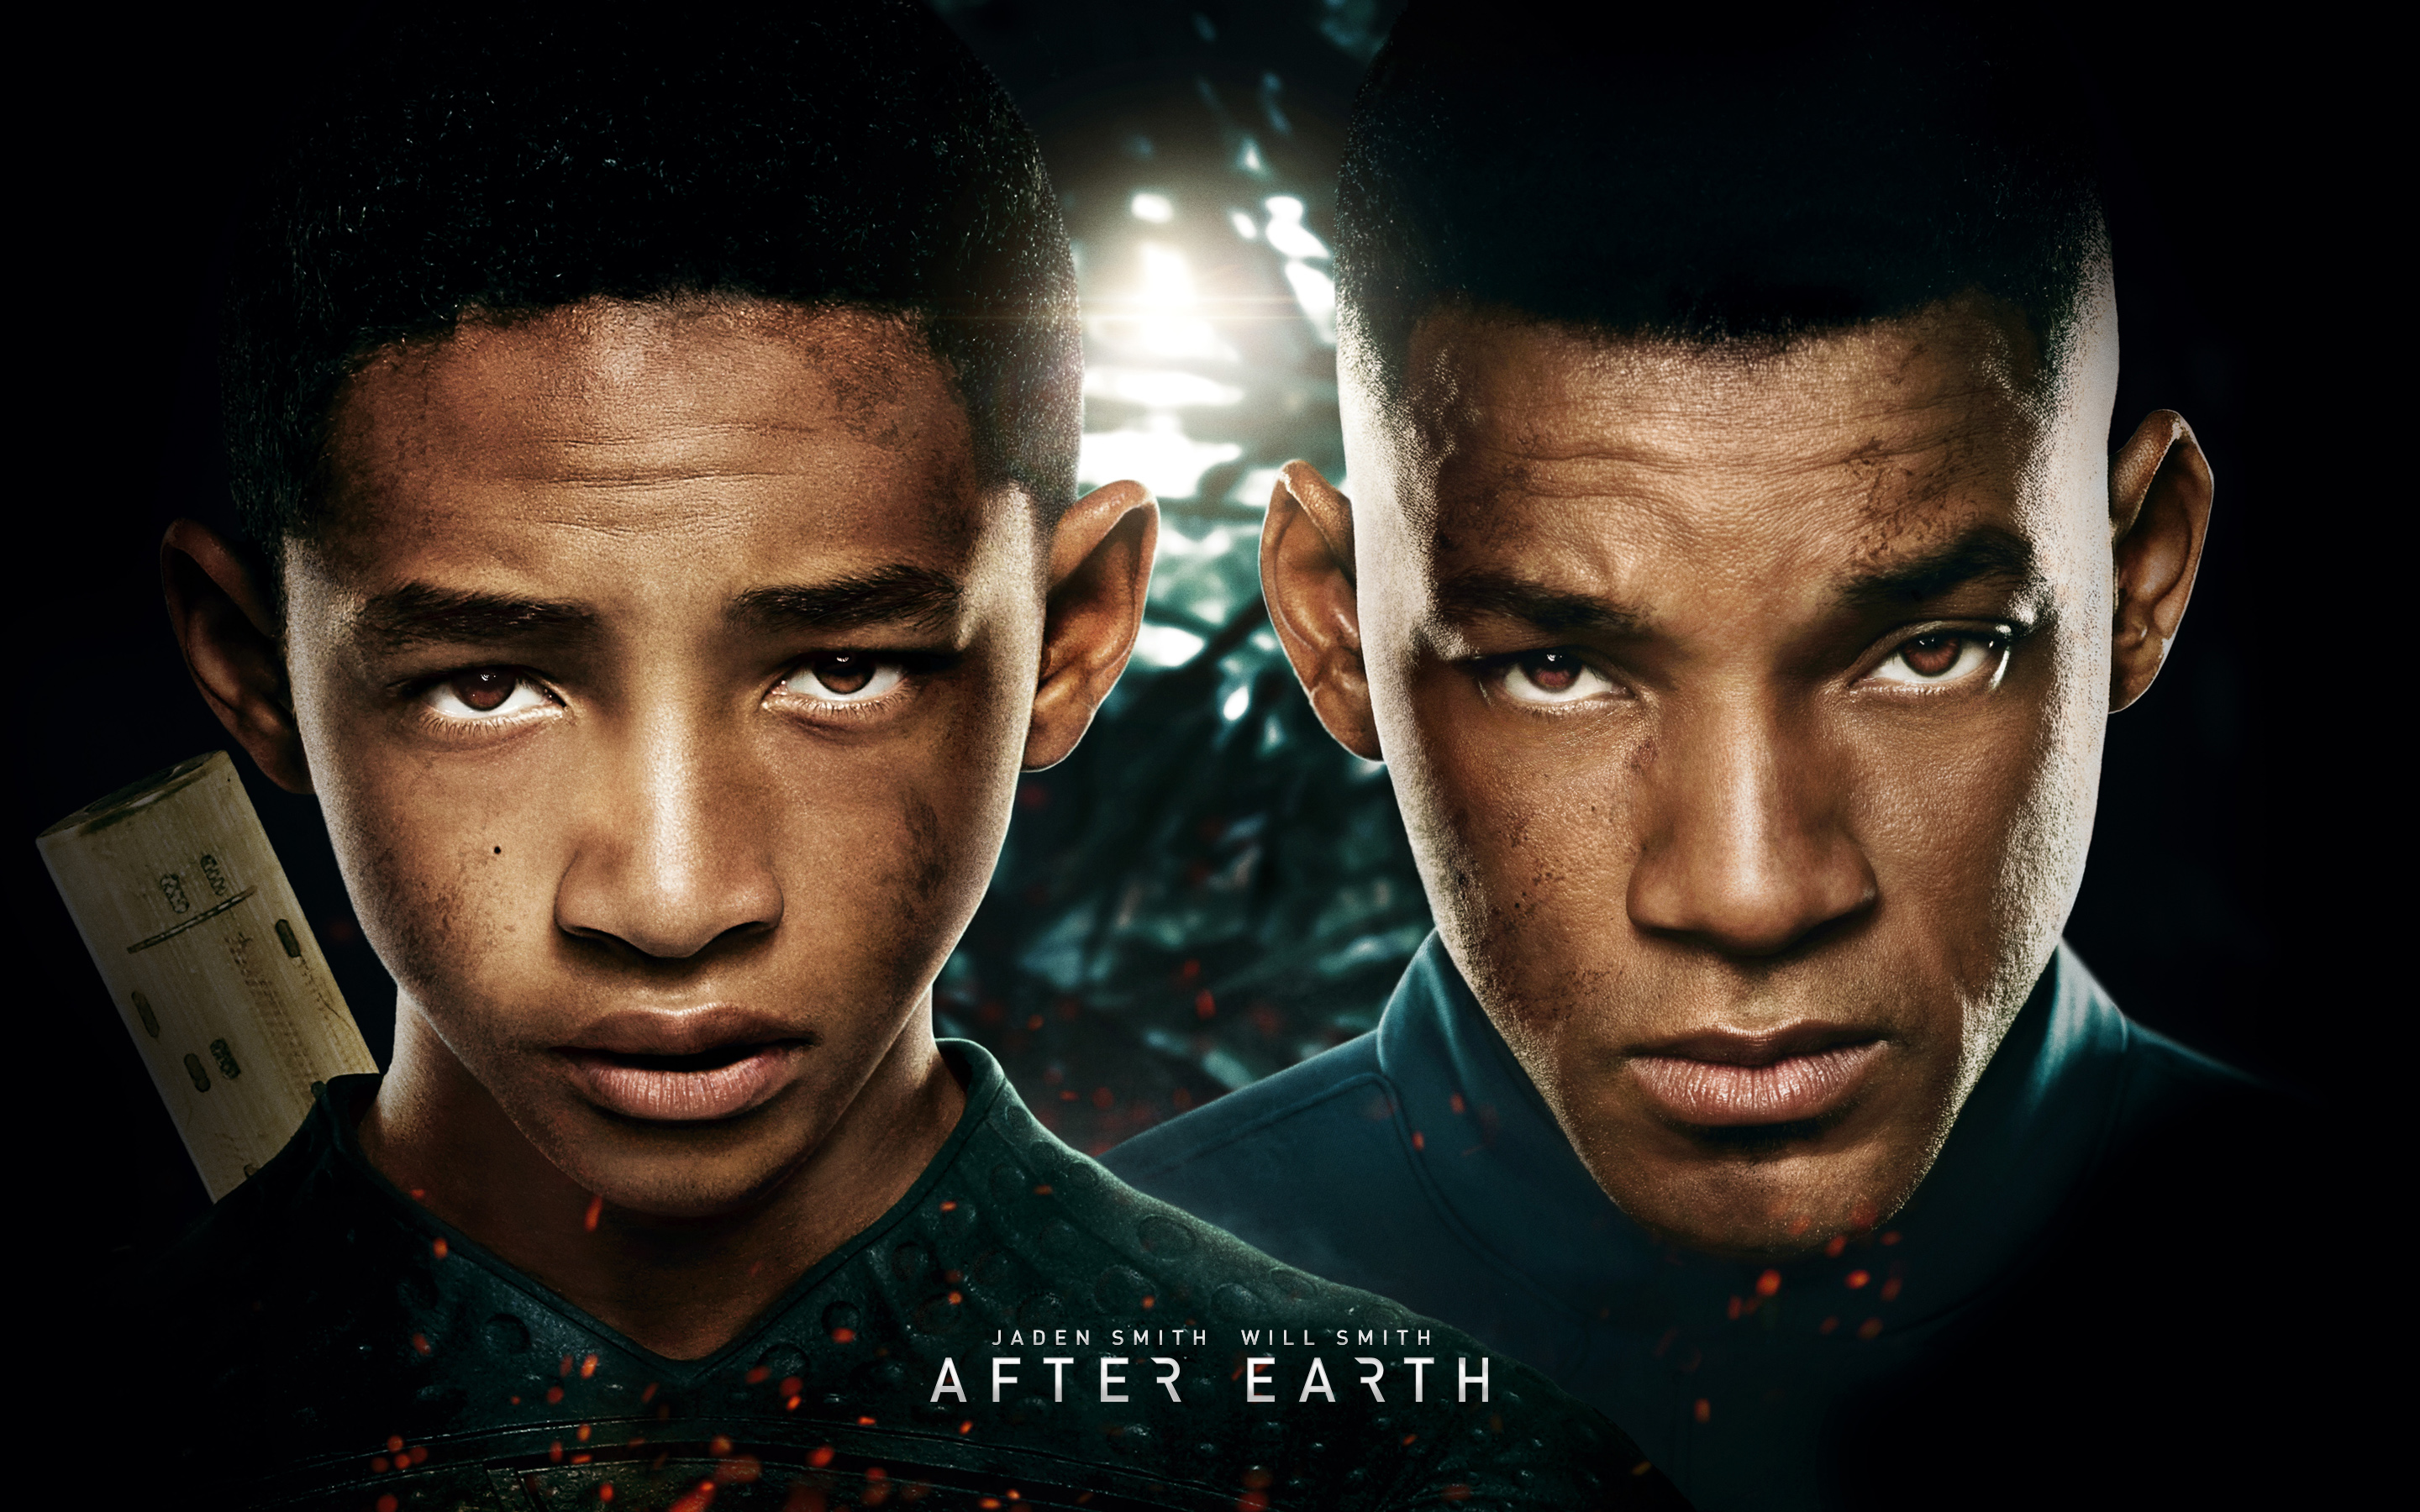 after-earth-movie-2013.jpg